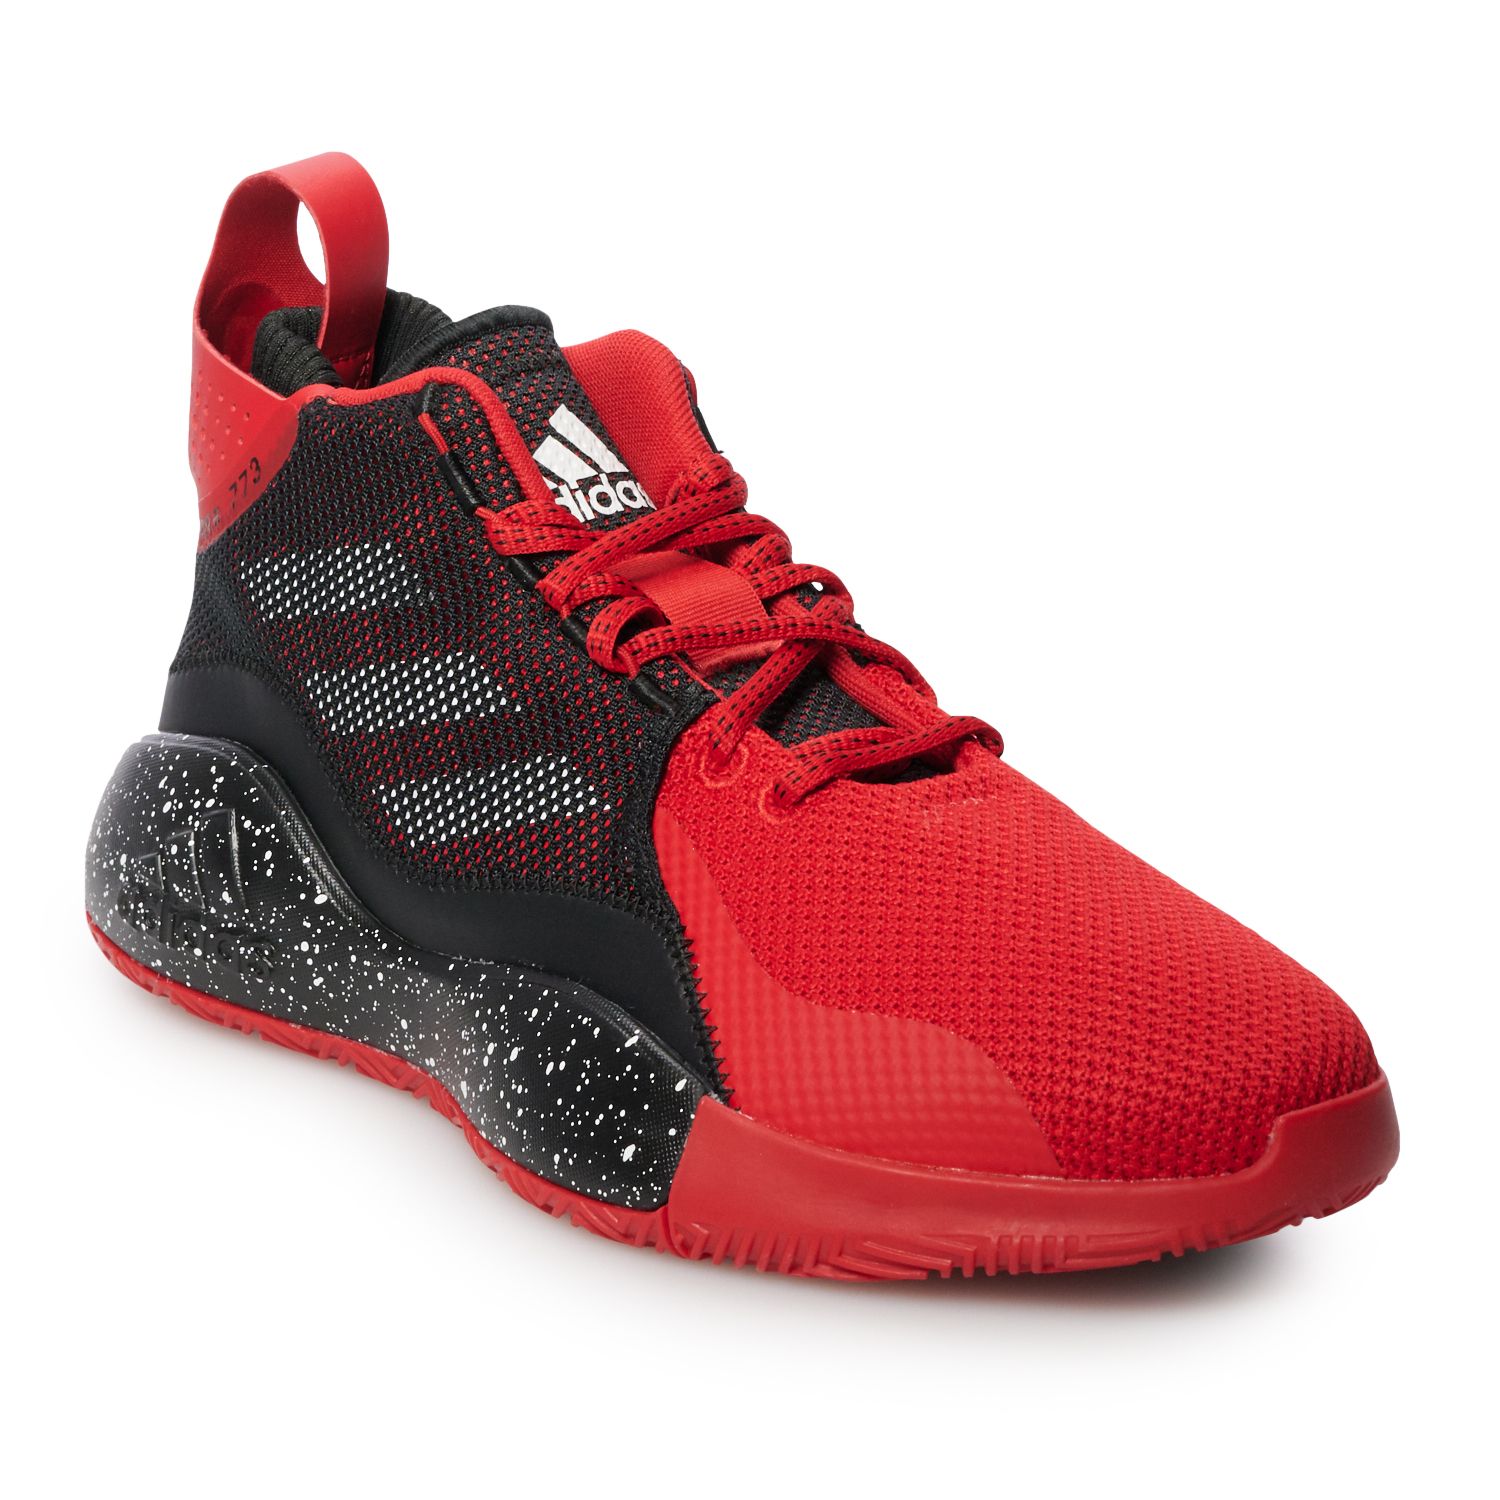 mens adidas shoes red and black